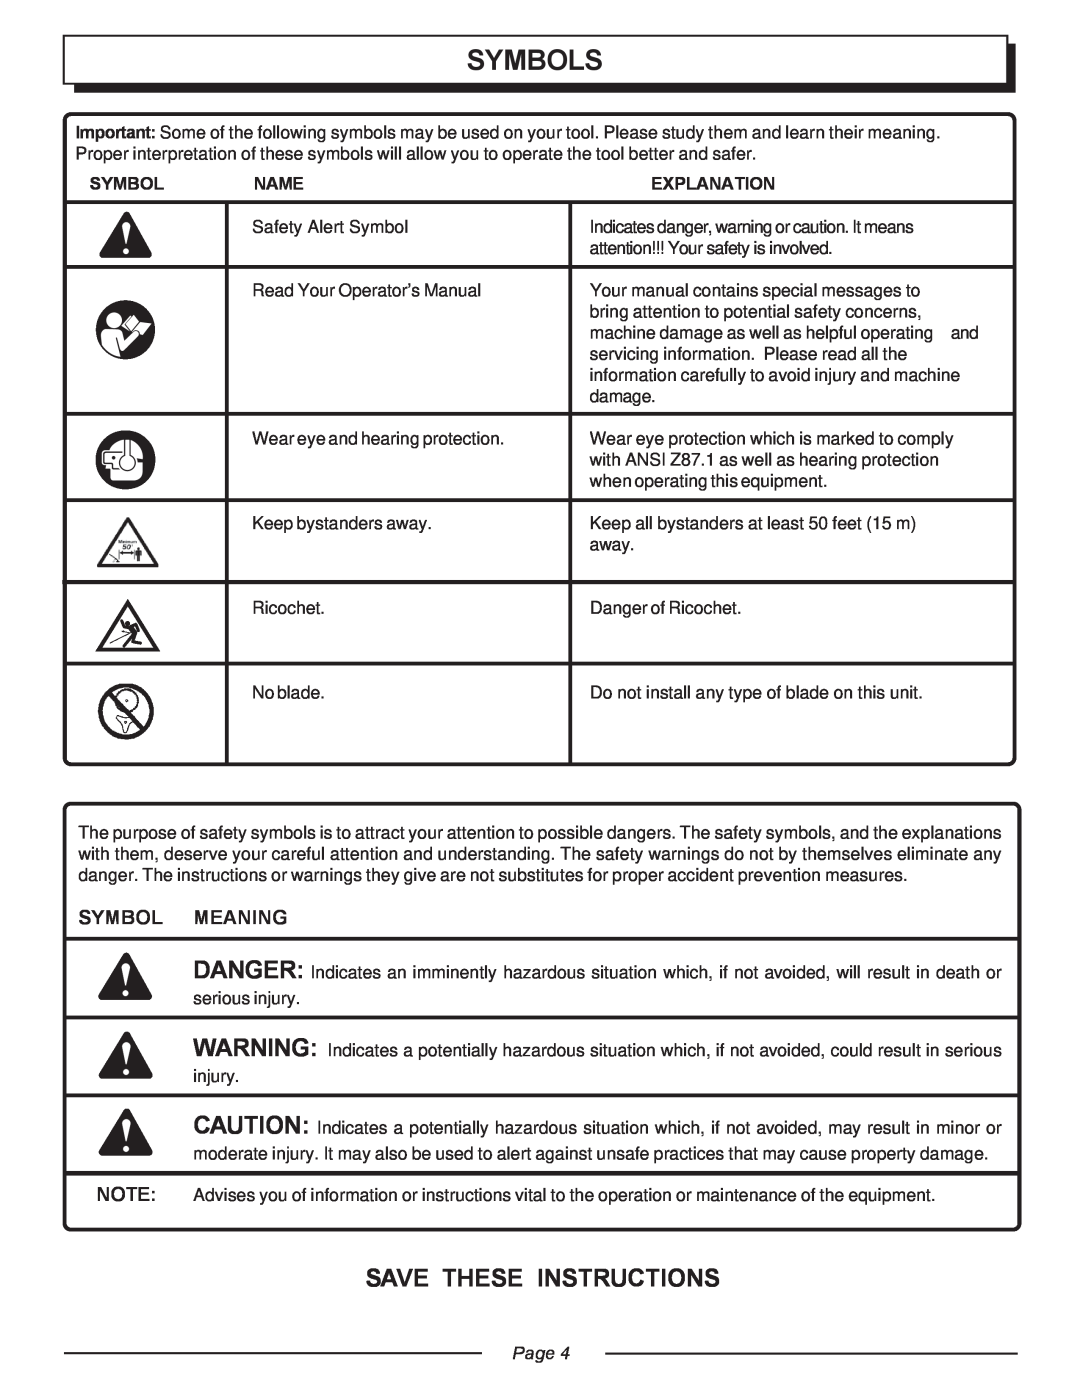 Homelite UT20818 manual Symbols, Save These Instructions, Symbol Meaning, Name, Explanation, Page 